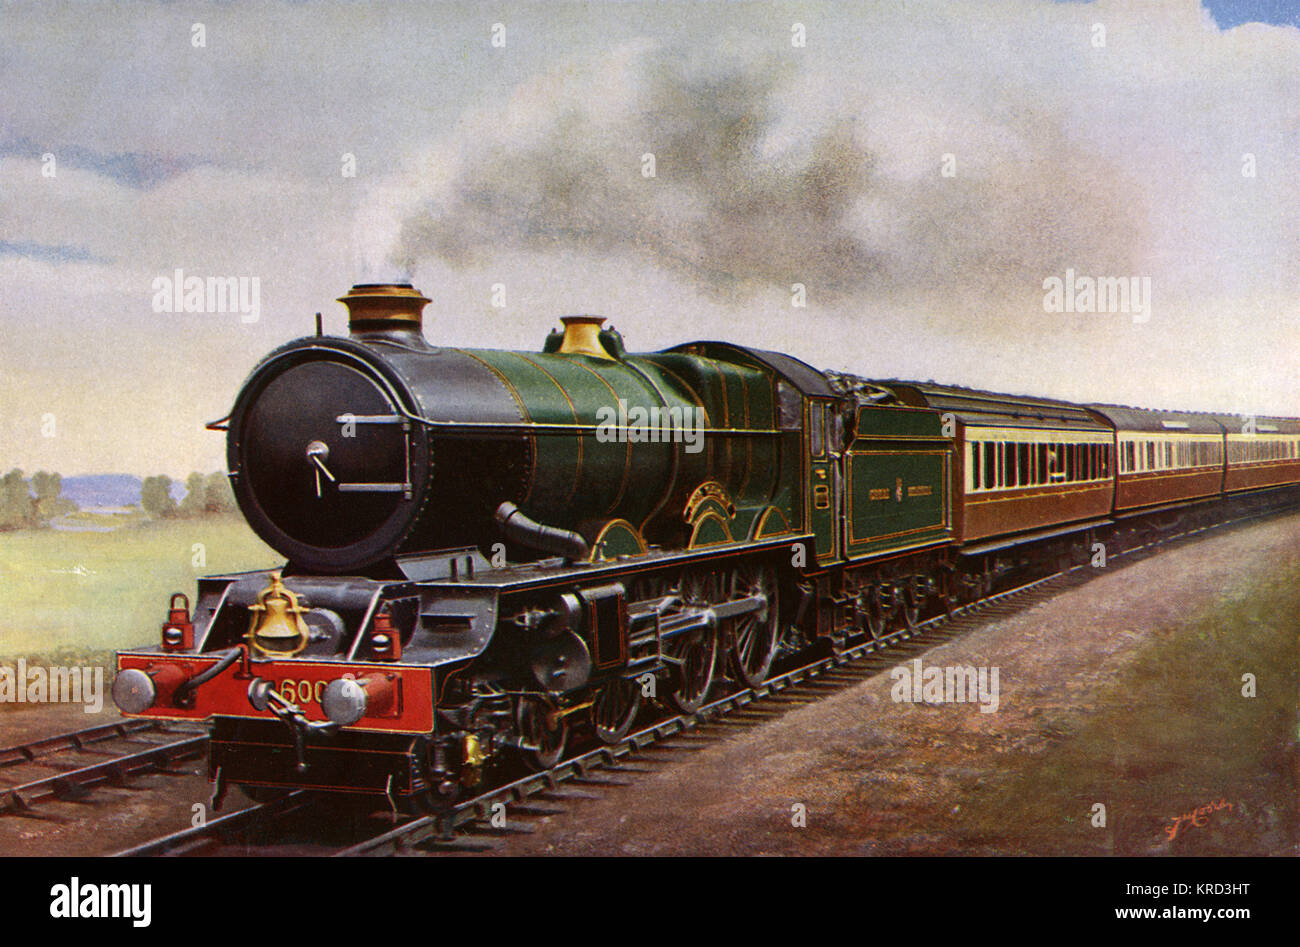 The 'Cornish Riviera Express' hauled by 'King George V', a locomotive of the Great Western Railway.     Date: c. 1930 Stock Photo